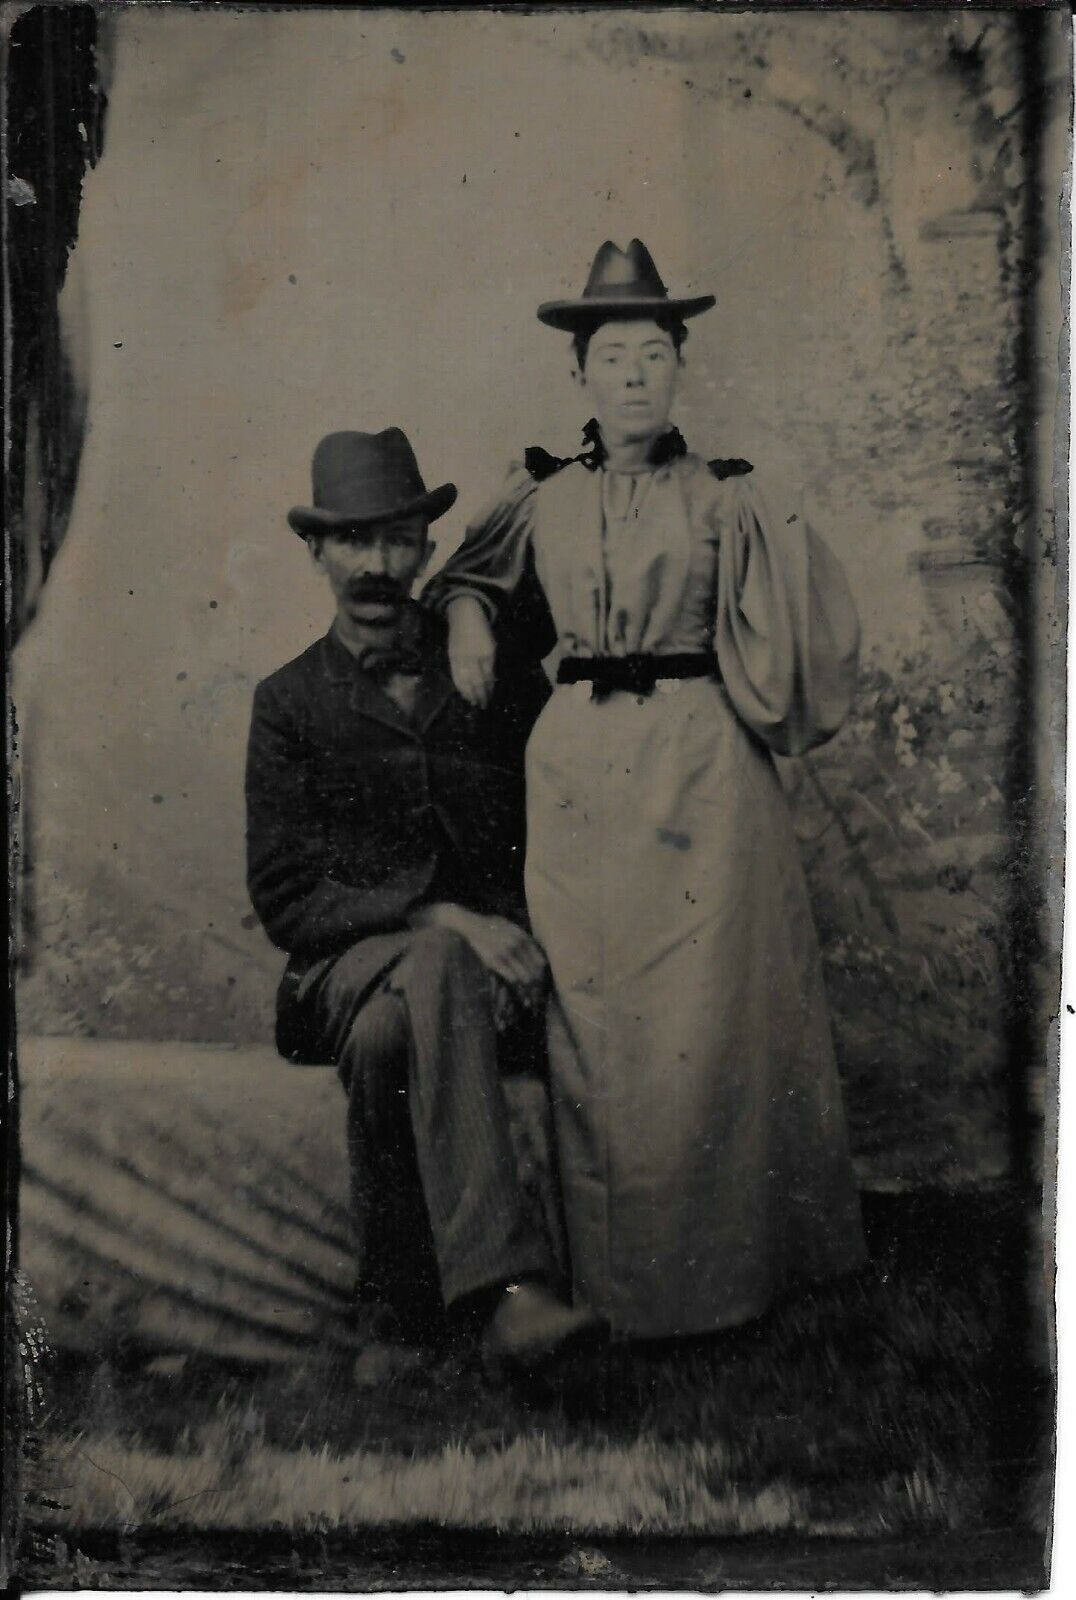 Tintype Possibly Jesse James' Mother and Stepfather, Missing Arm, Face-Matched